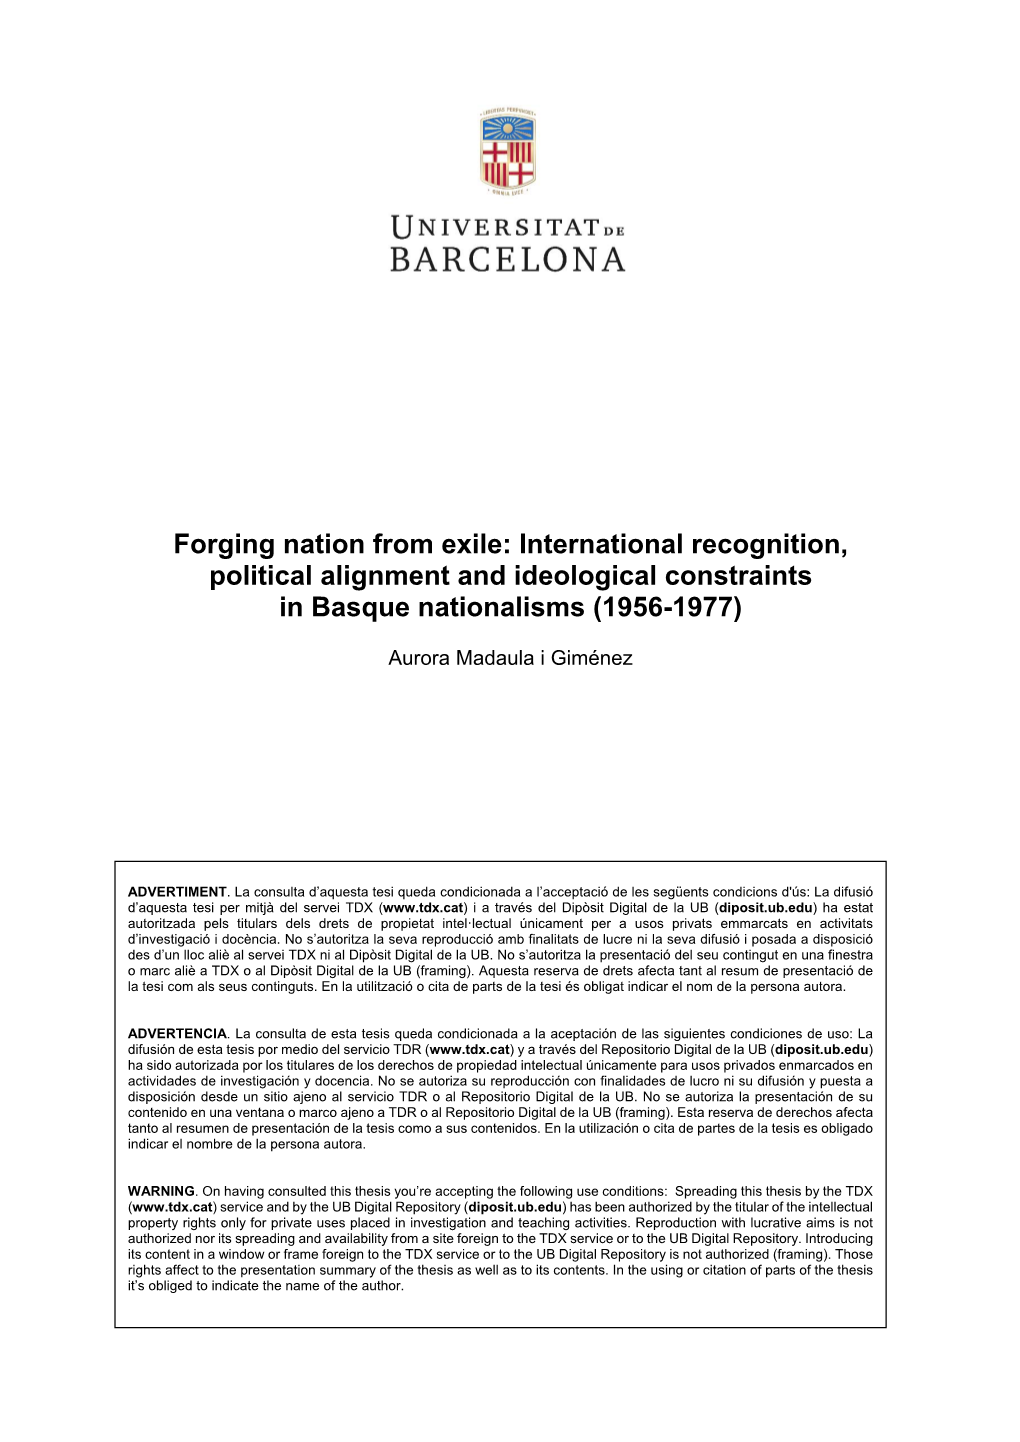 Forging Nation from Exile: International Recognition, Political Alignment and Ideological Constraints in Basque Nationalisms (1956-1977)